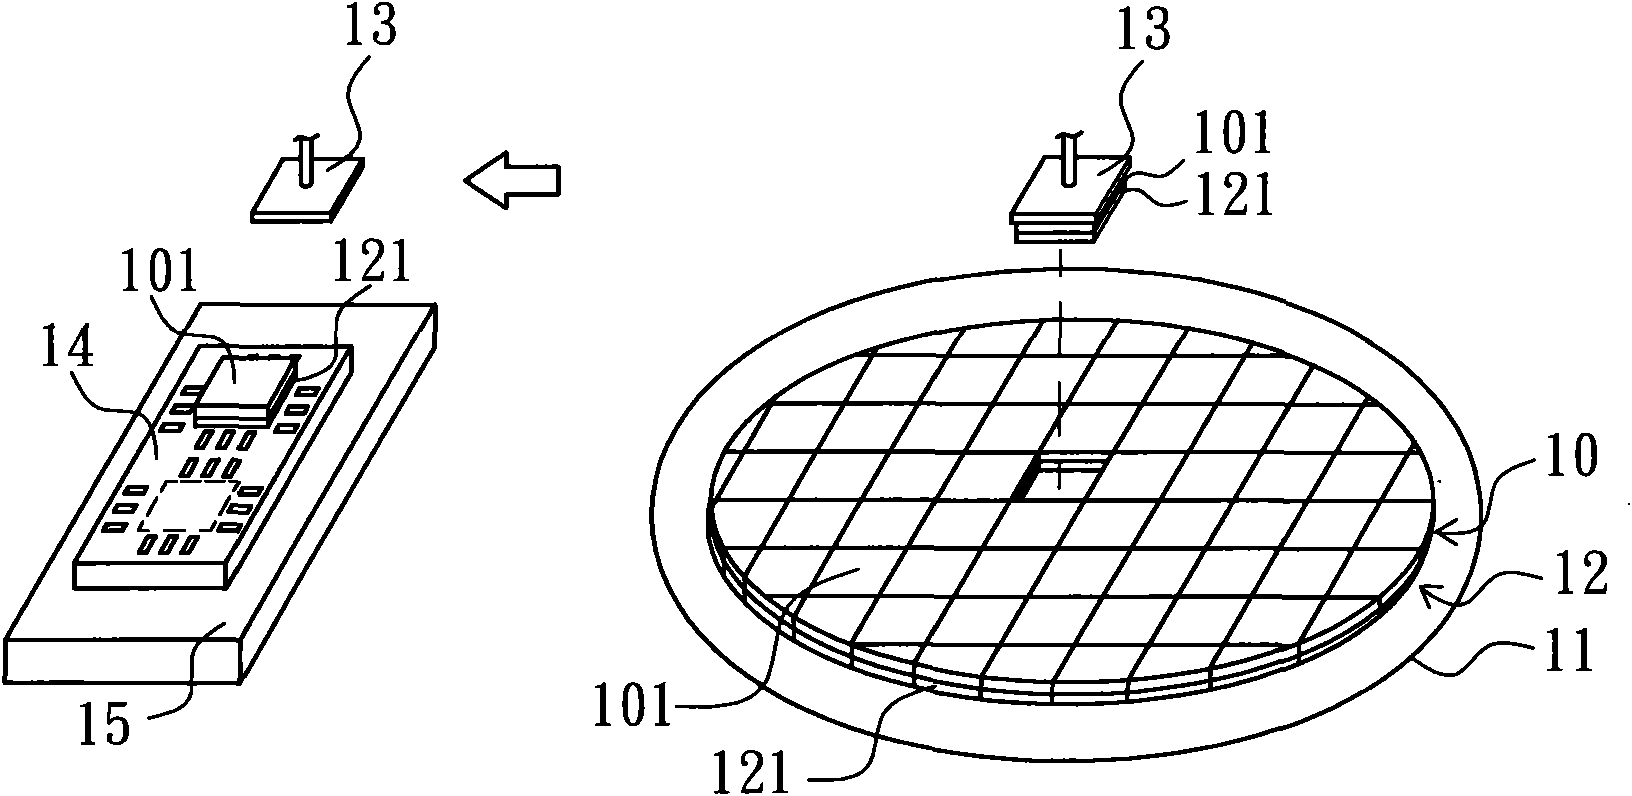 Device and method for heating adhesive film used for bonding chips